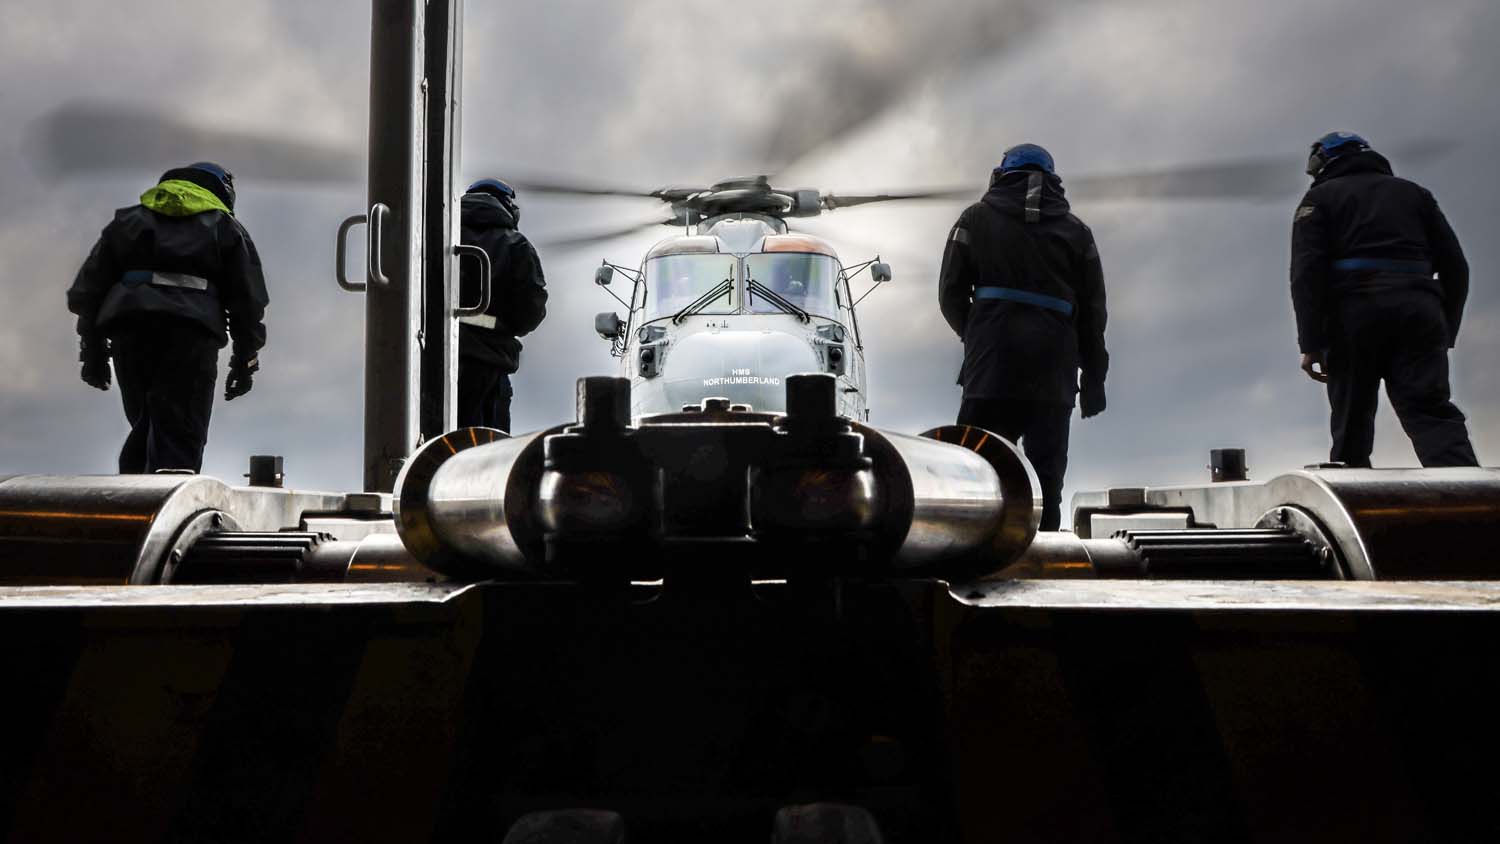 Pictured: Royal Navy Aircrew prepare to lash down a Royal Navy Merlin on HMS Northumbedrland.On Saturday 22nd April 2023, HMS Northumberland left the port of Aberdeen in preparation for Exercise Dynamic Mongoose. The exercise sees NATO ships coming together to prove capability for anti submarine warfare. Ships, submarines and aircraft working together to maintain a high state of readiness at the highest possible standard. HMS Northumberland is a Royal Navy Type 23 frigate, based in Plymouth. She specialises in hunting submarines and currently has a Royal Navy Merlin embarked for her current taskings.